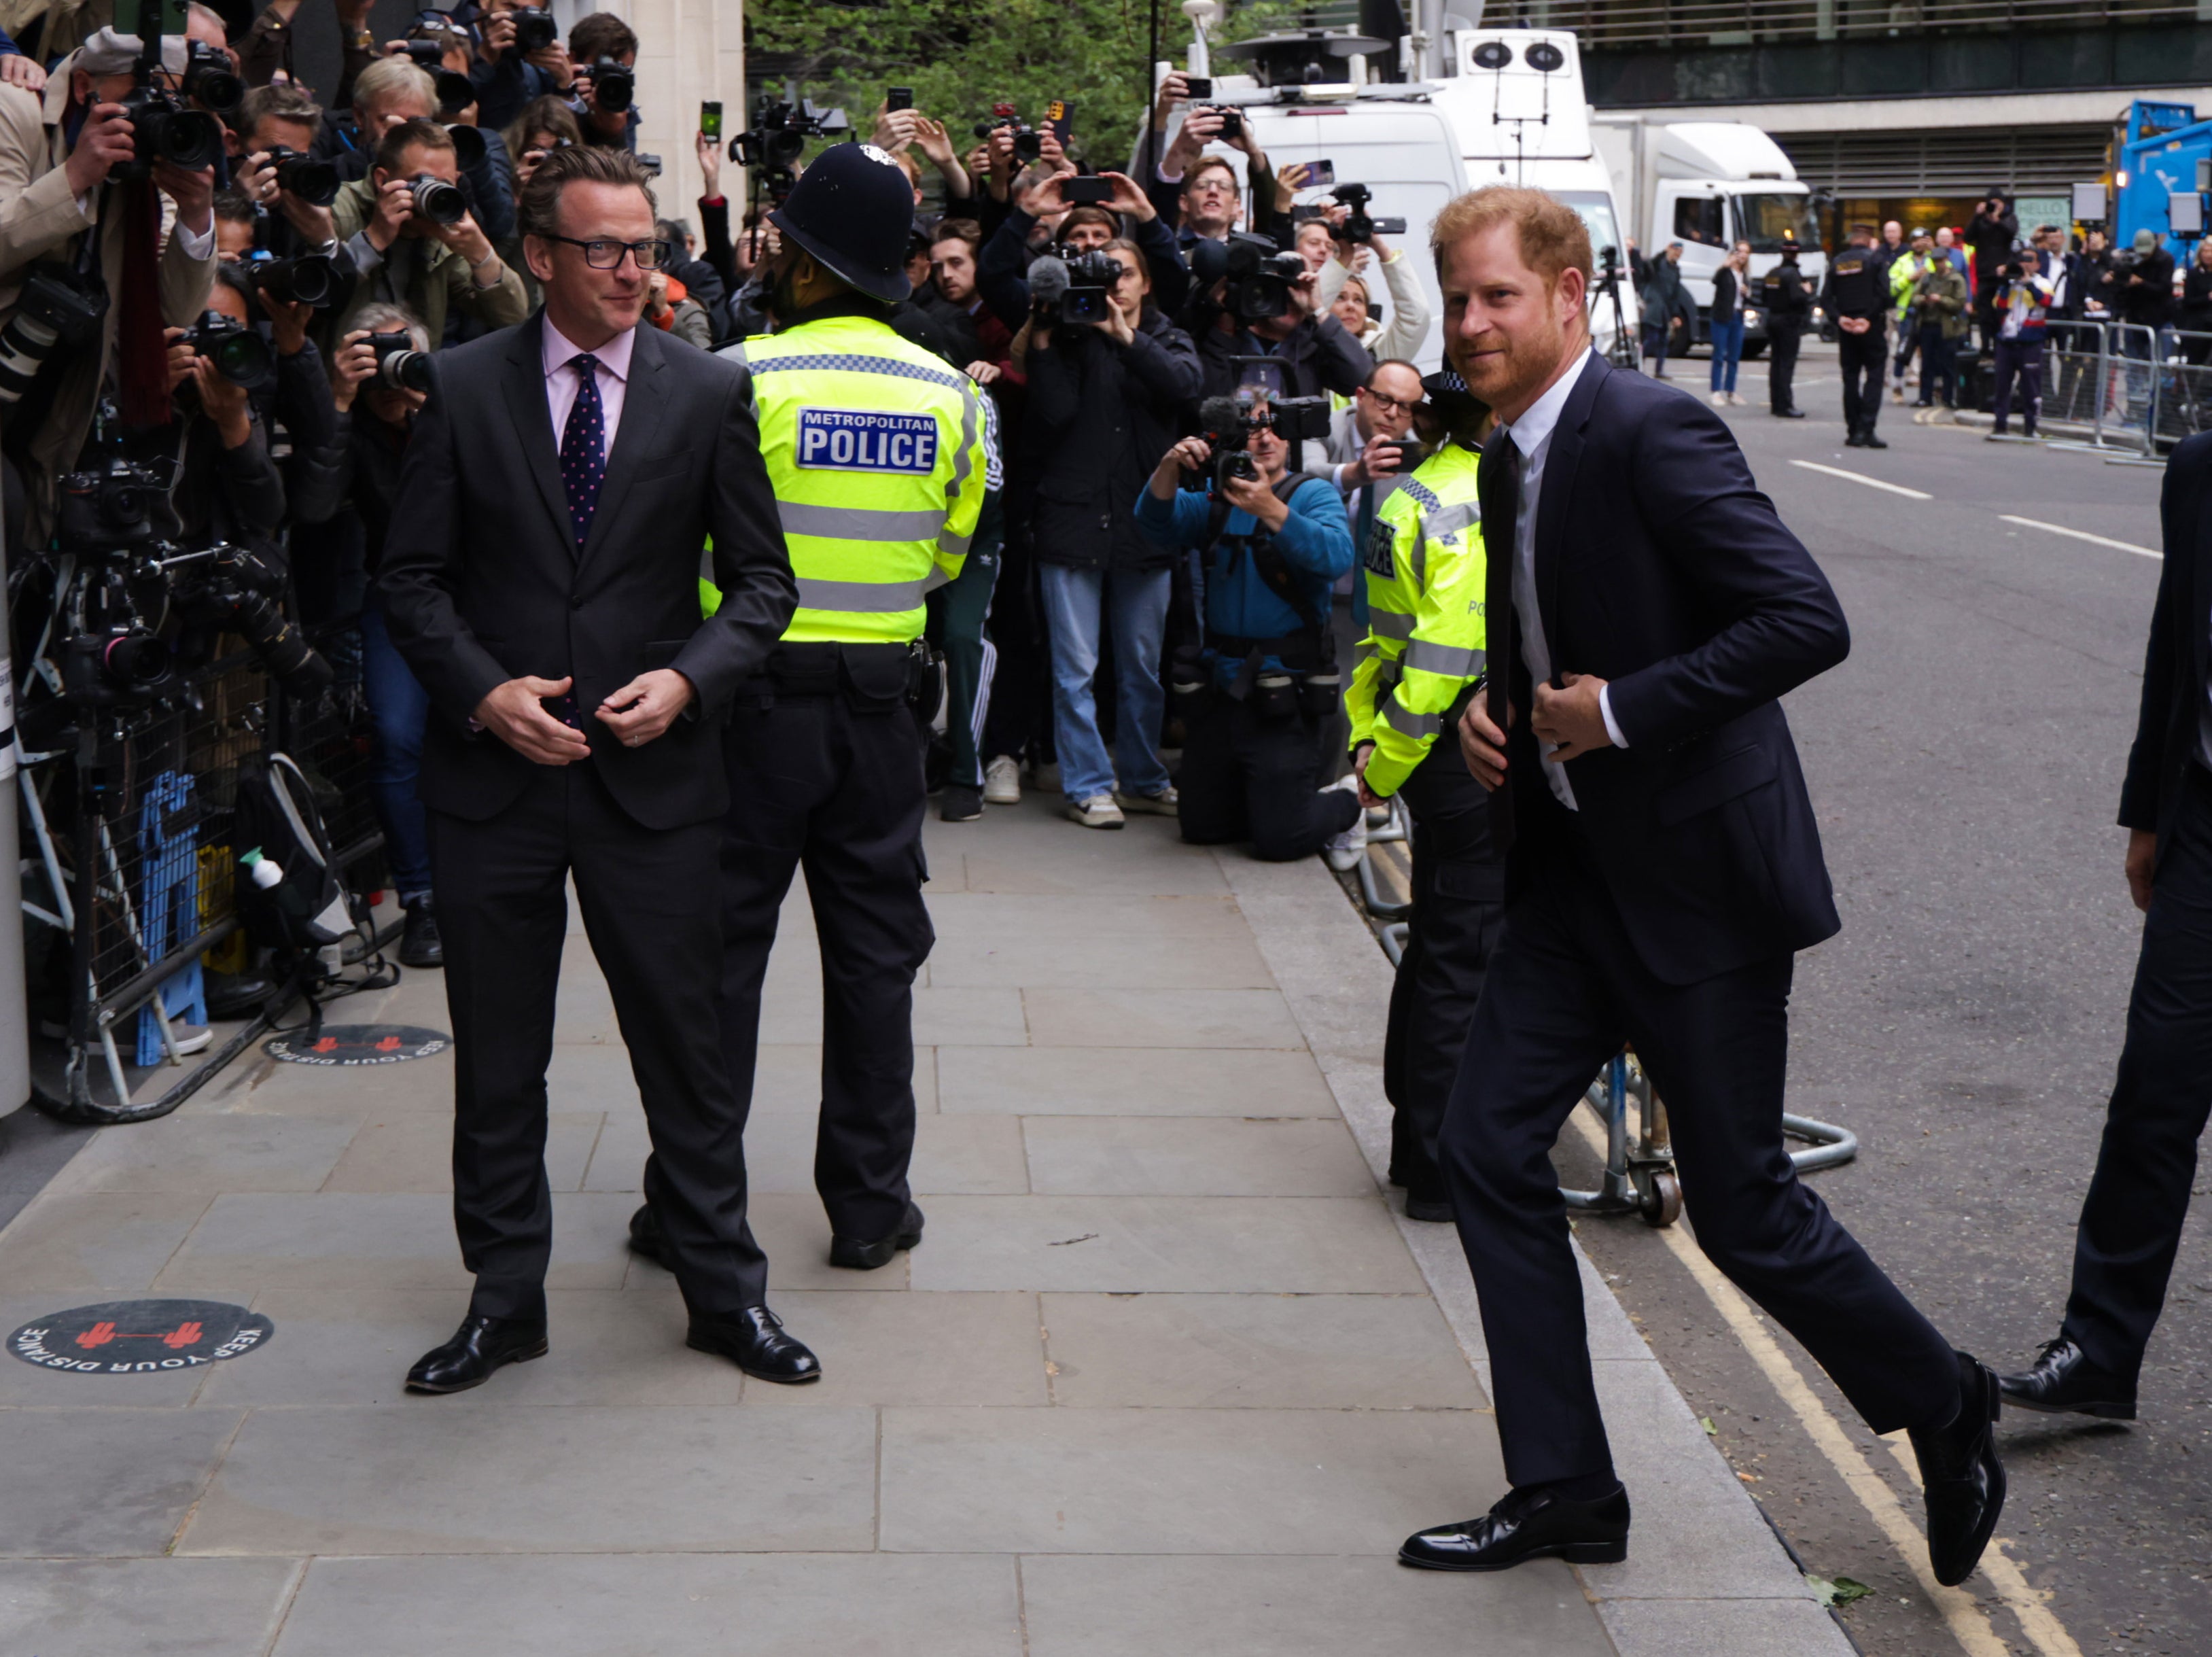 Harry arrives at court ahead of explosive hearing